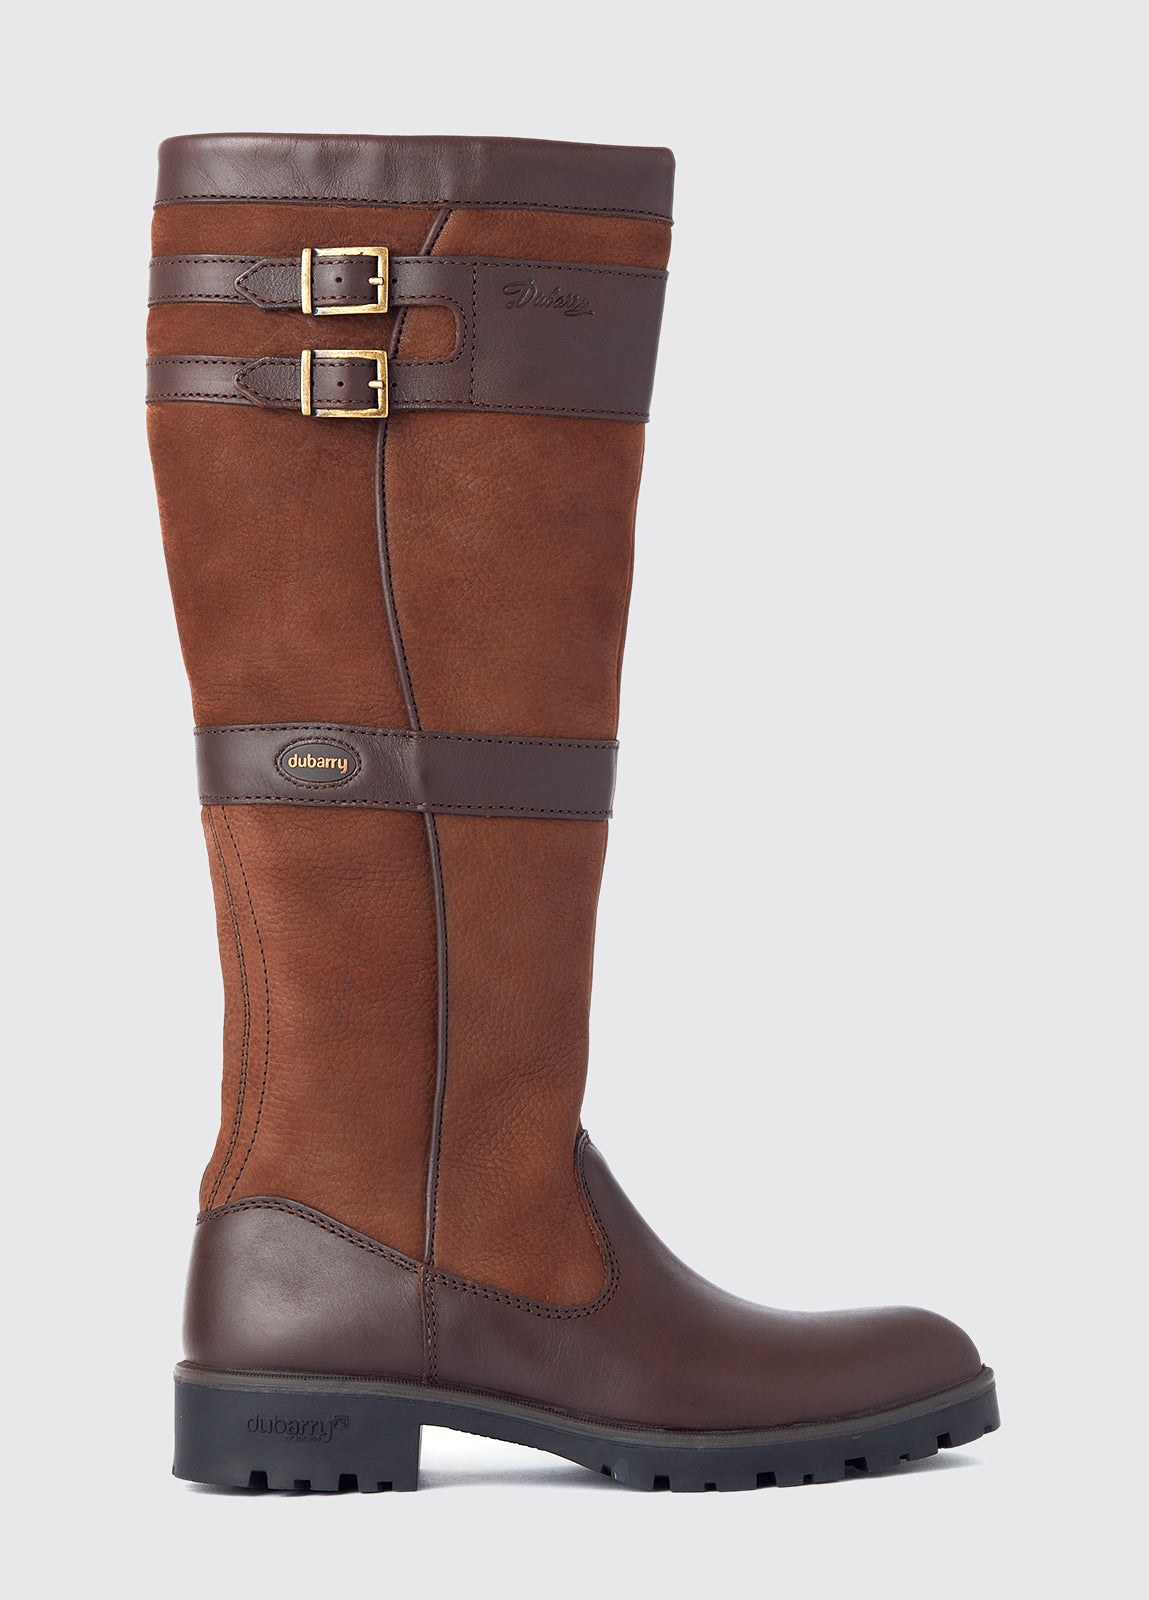 Dubarry Ladies Longford Country Boot in Walnut